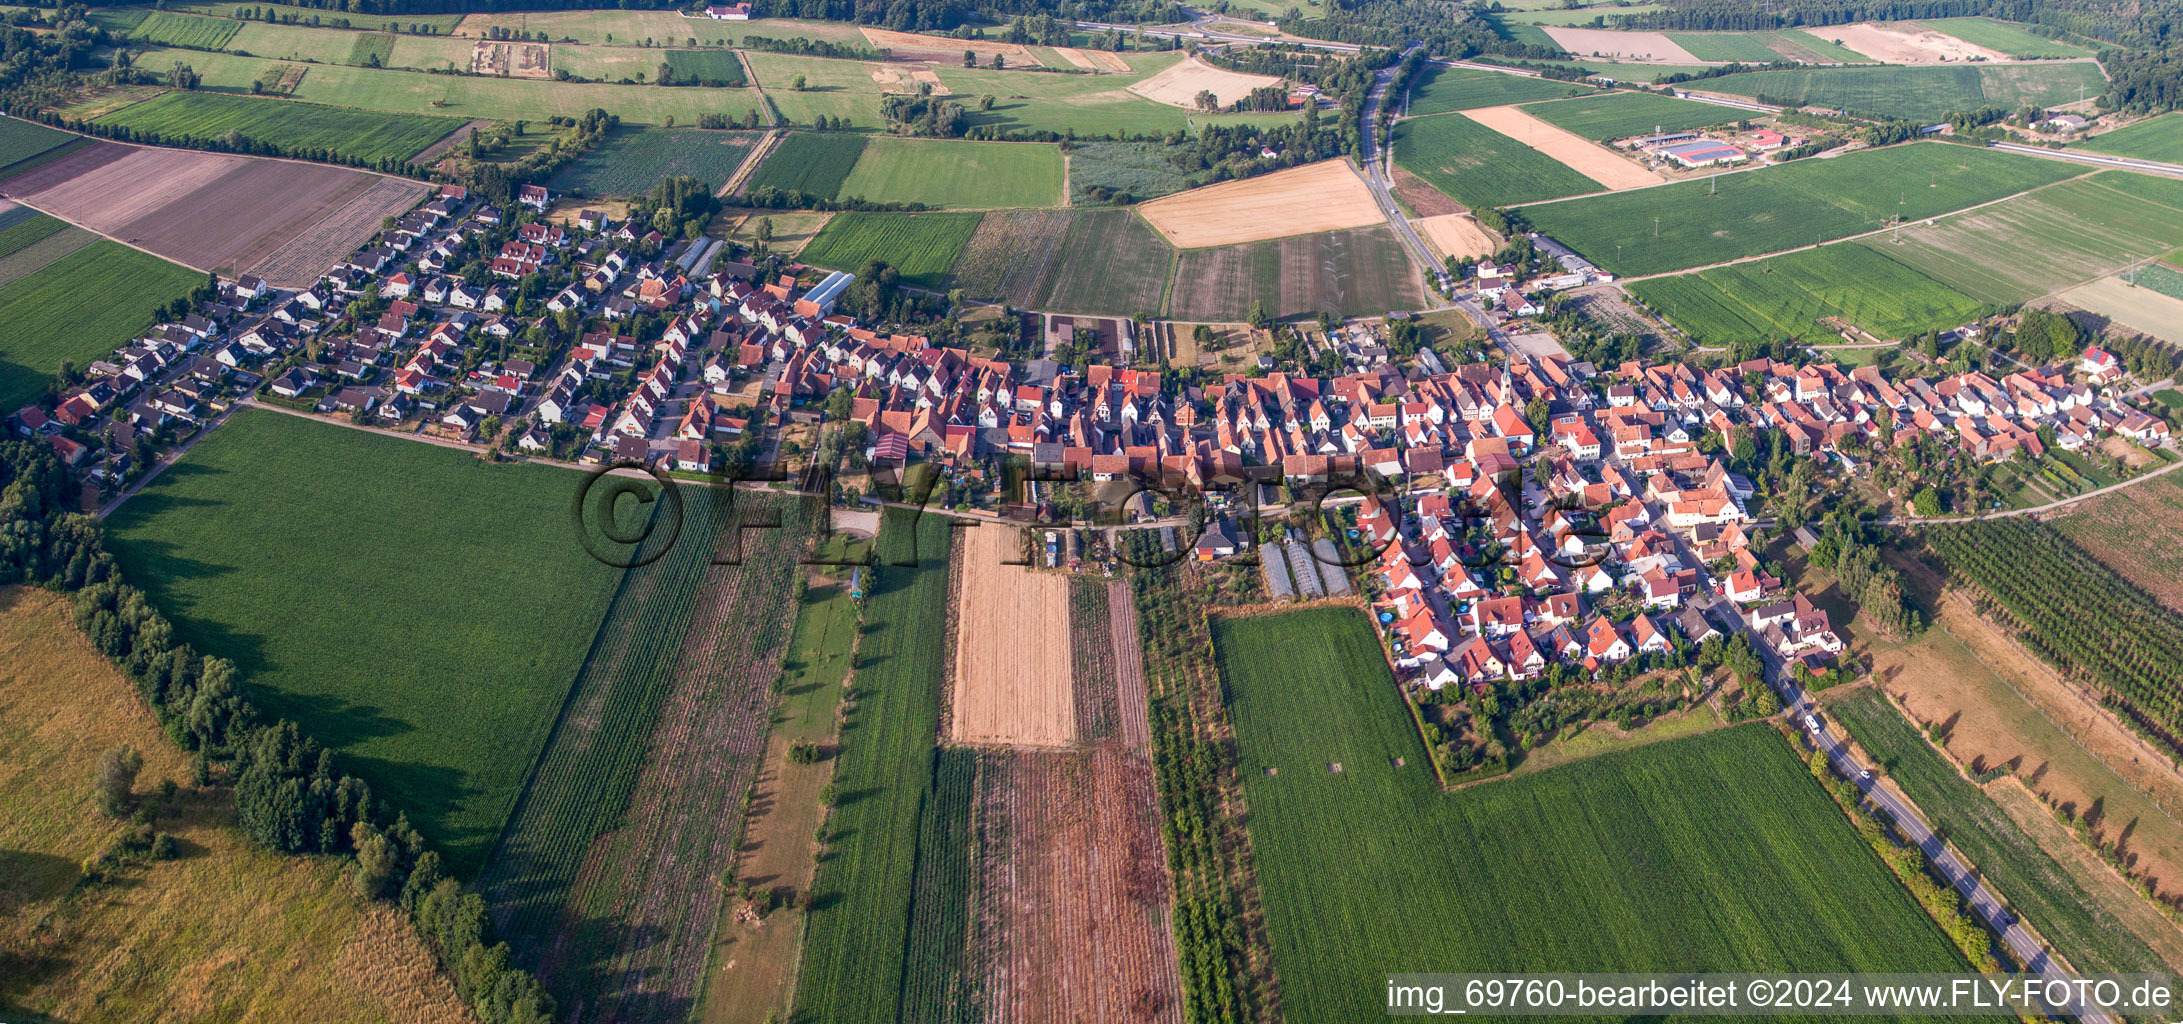 From the north in Erlenbach bei Kandel in the state Rhineland-Palatinate, Germany viewn from the air